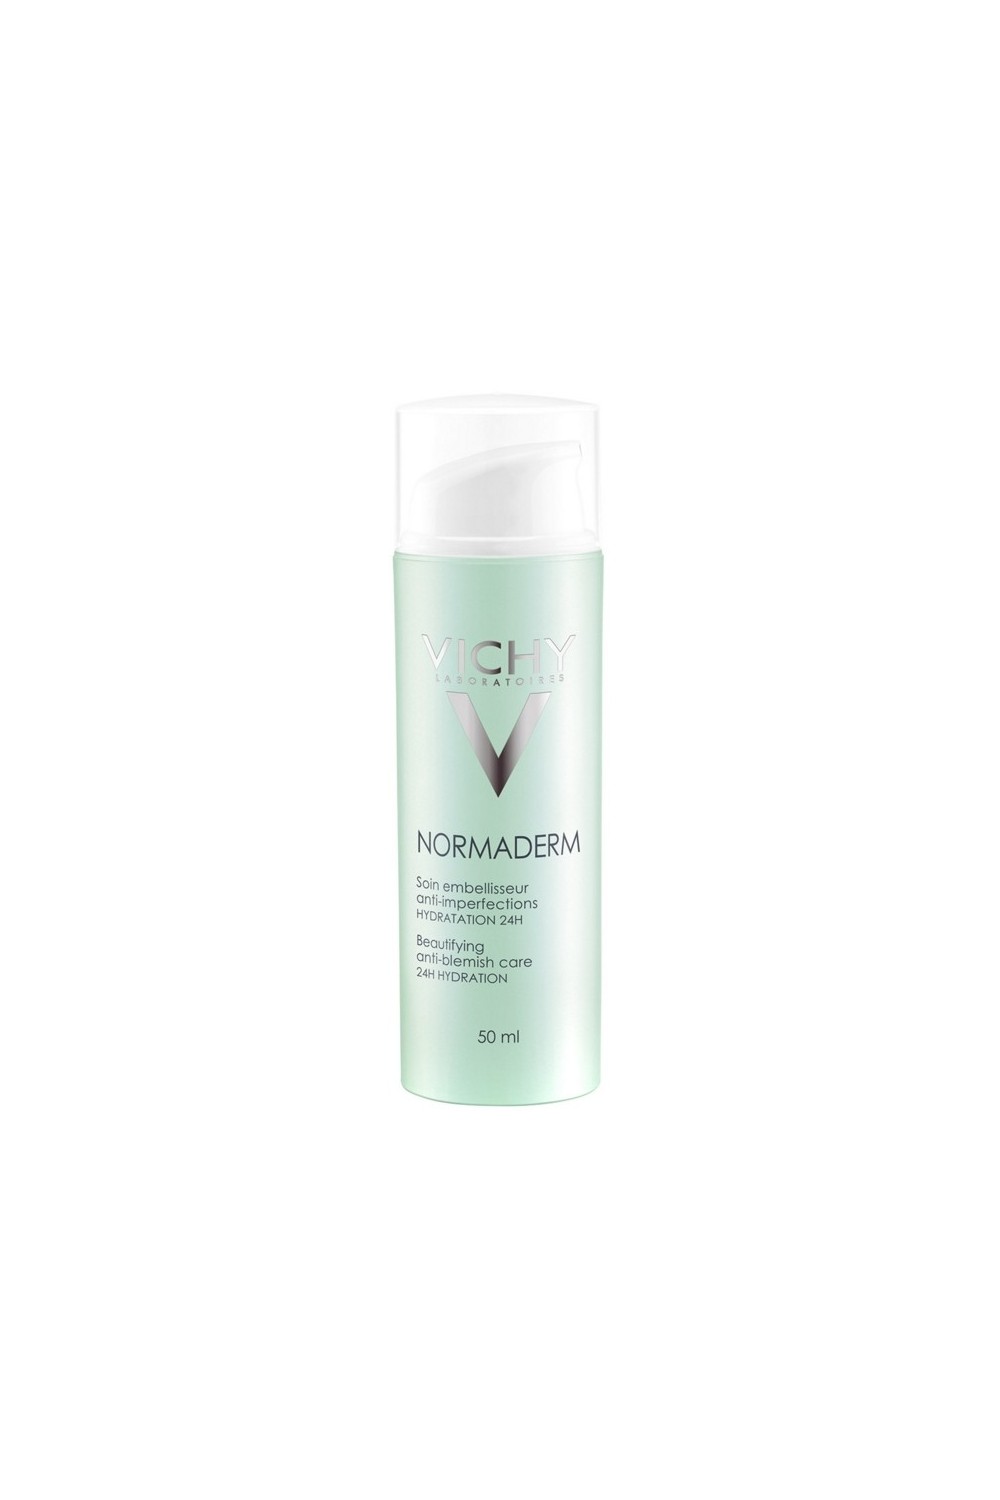 Vichy Normaderm Anti Blemish Care 50ml